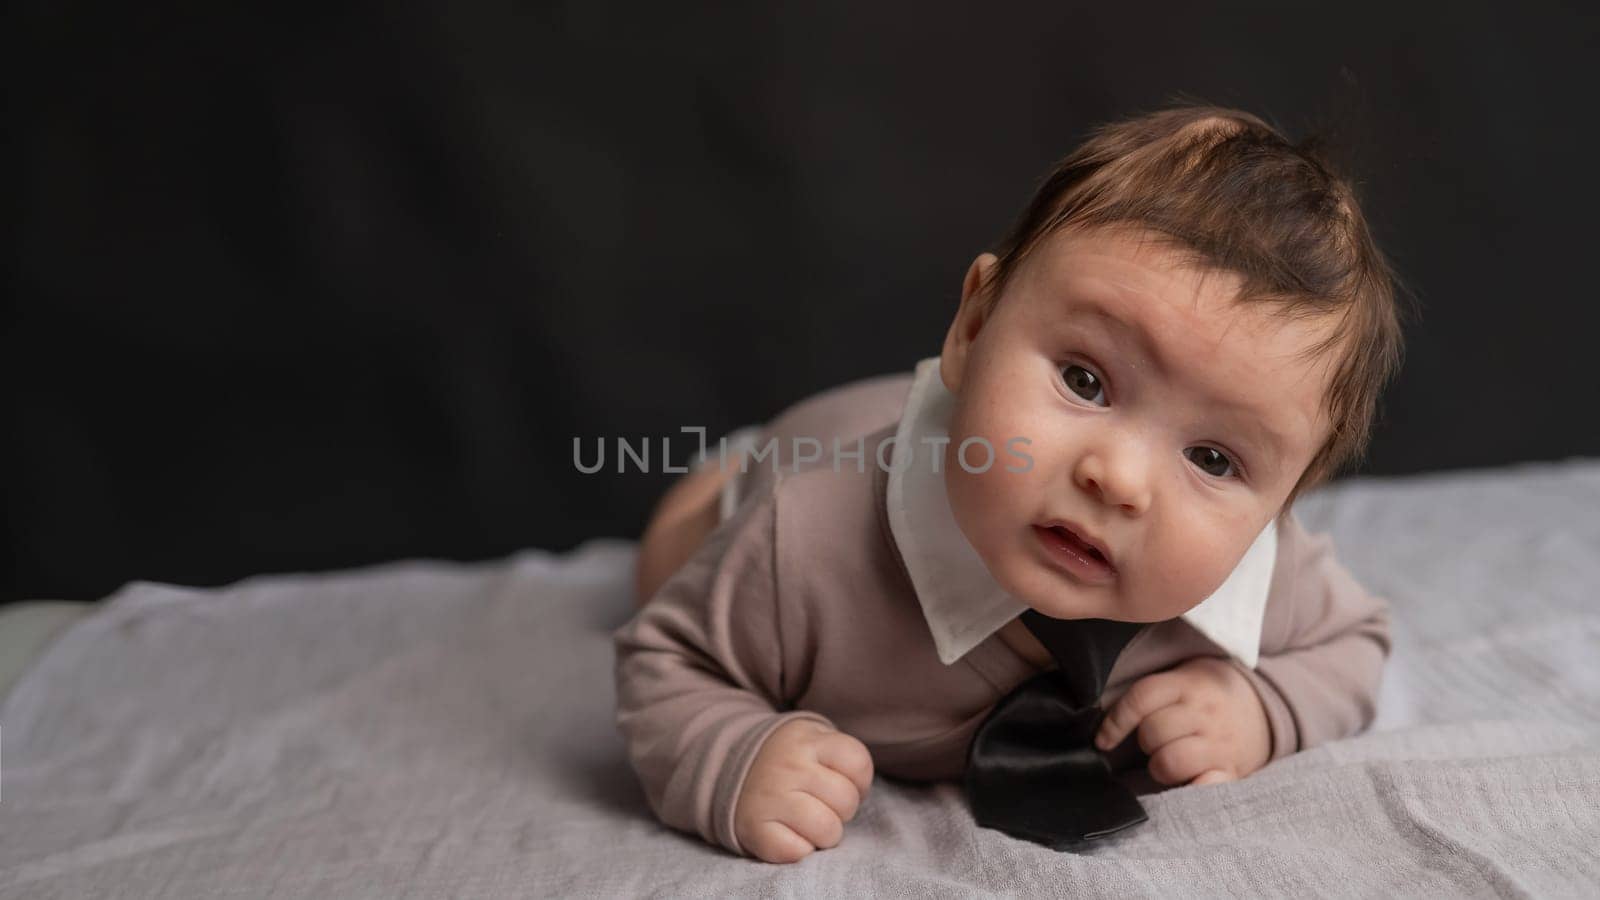 Portrait of a baby lying on his stomach wearing a tie on a black background